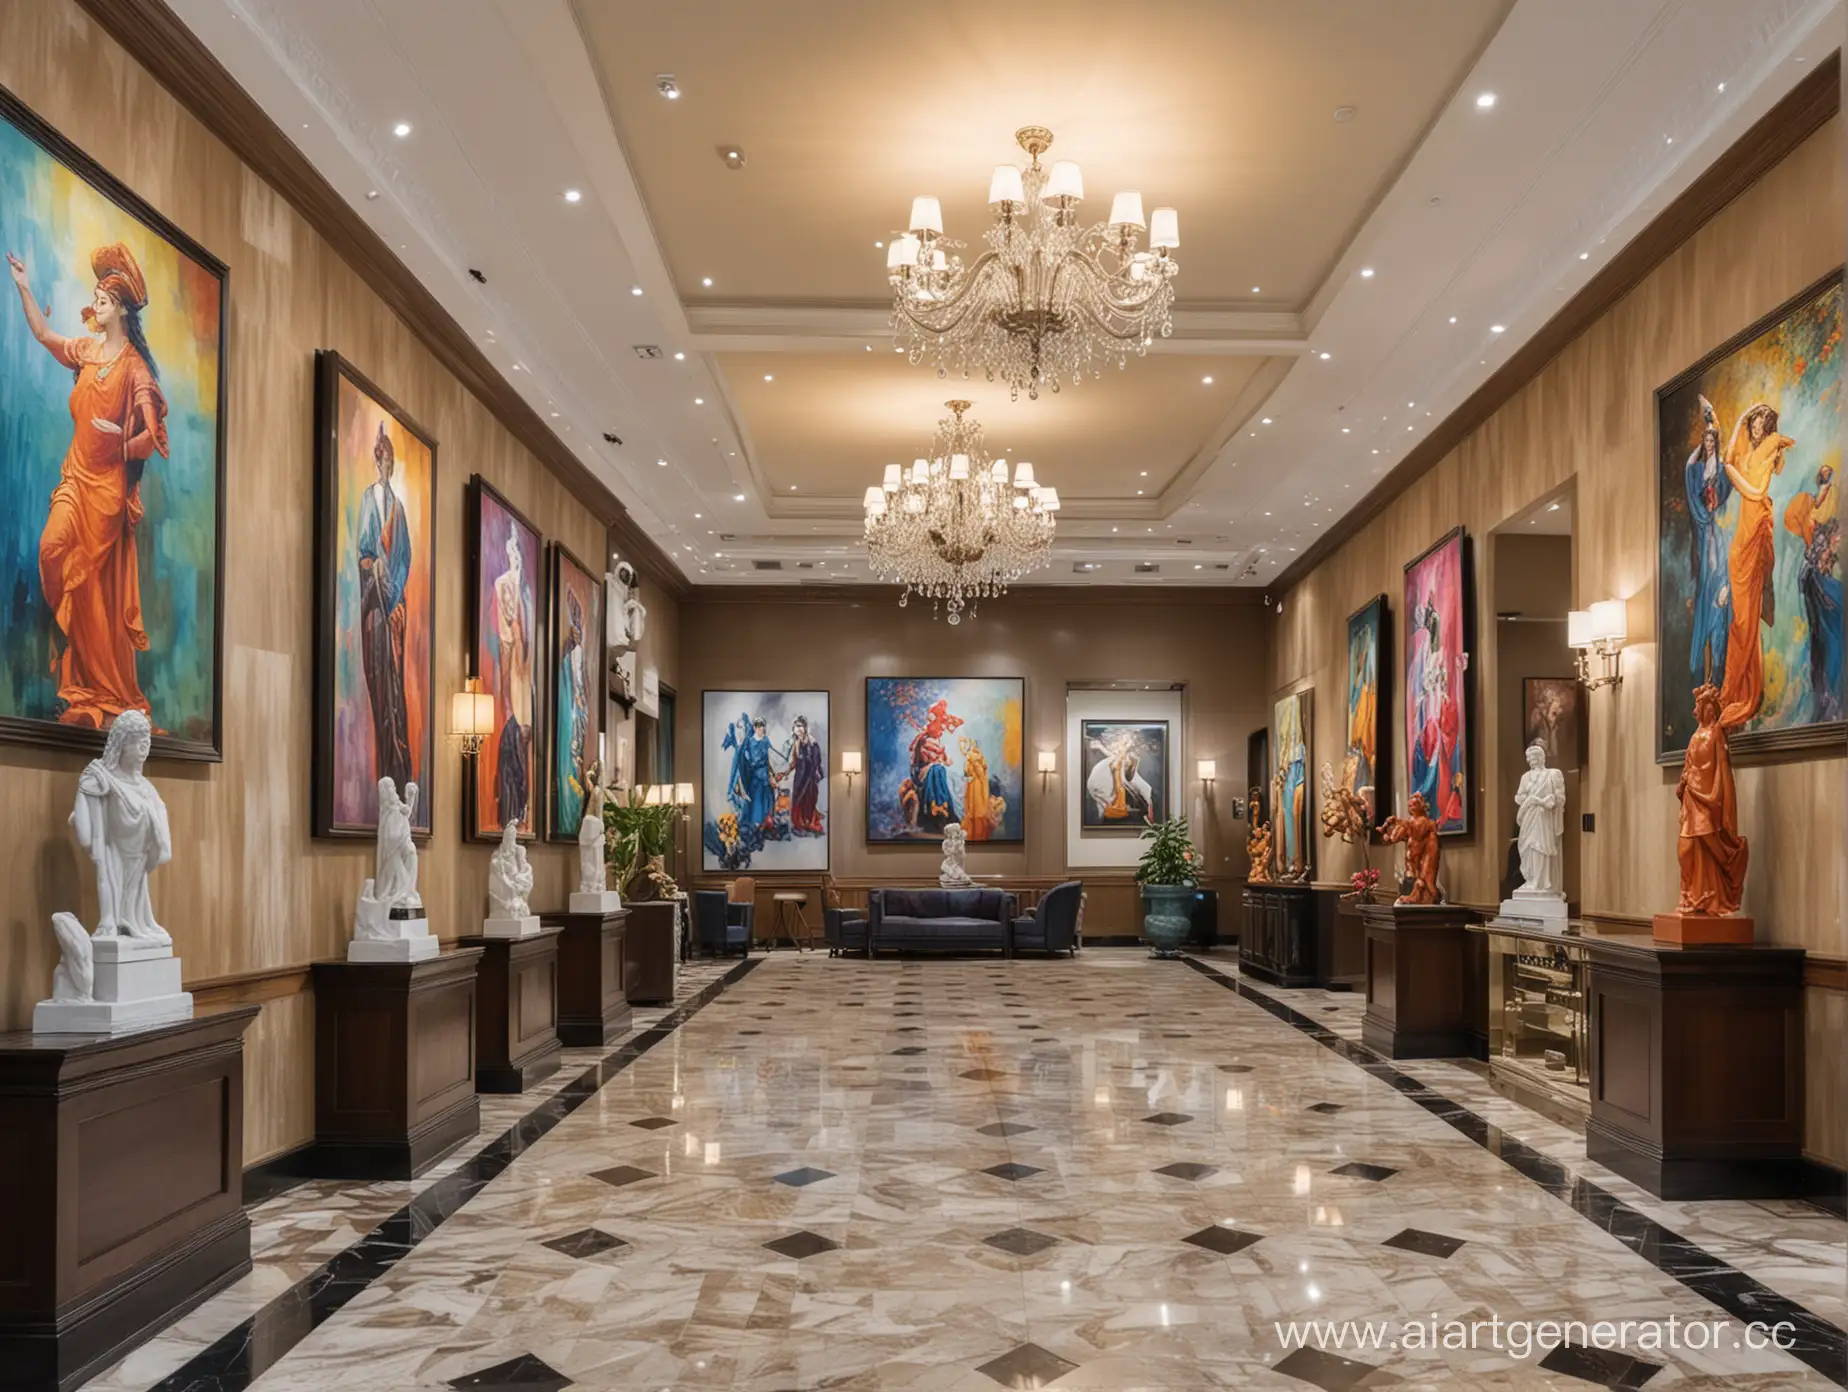 art themed hotel lobby with many paintings and statues